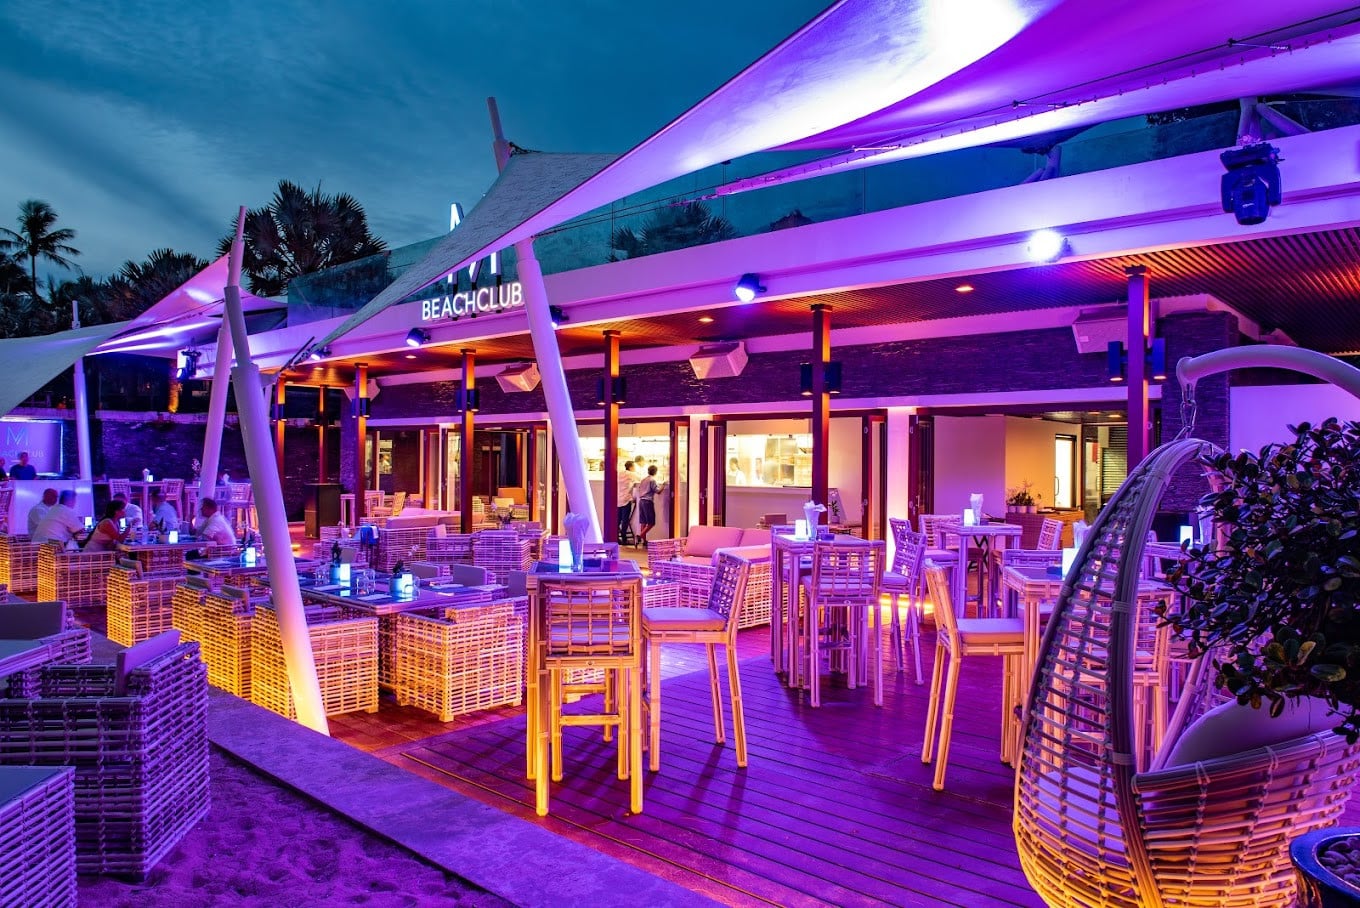 Party Scenes At The Relax Beach Bar Phuket